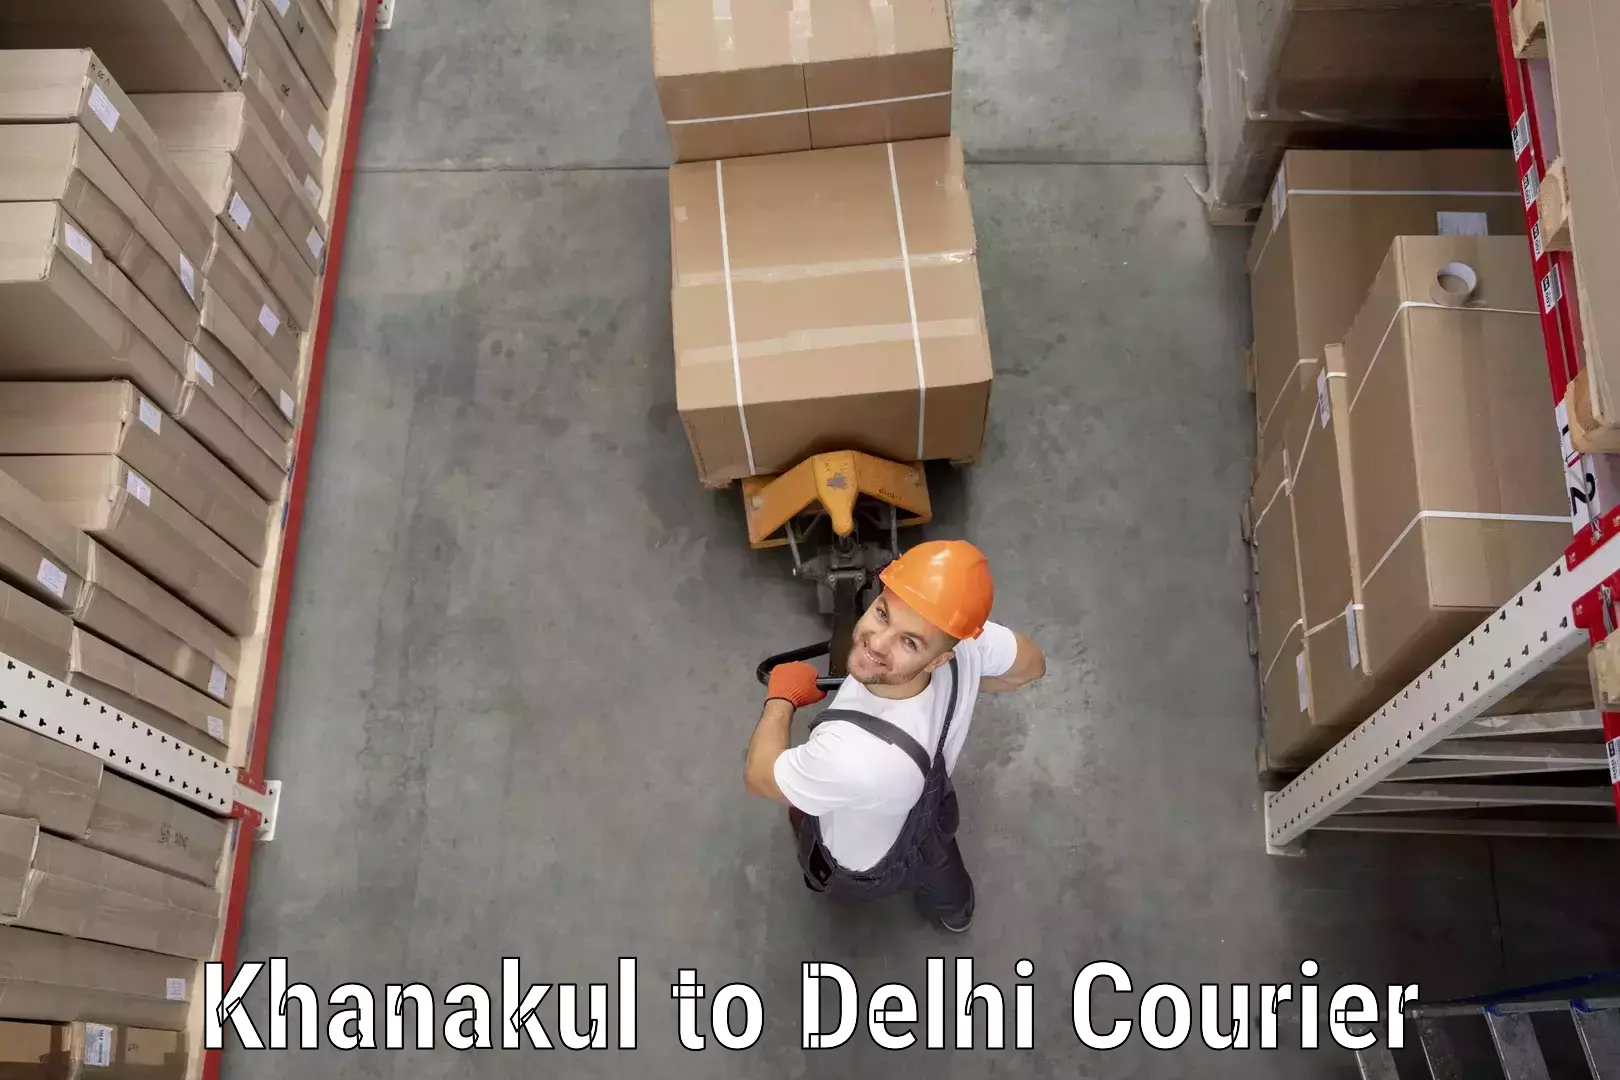 Small parcel delivery in Khanakul to Delhi